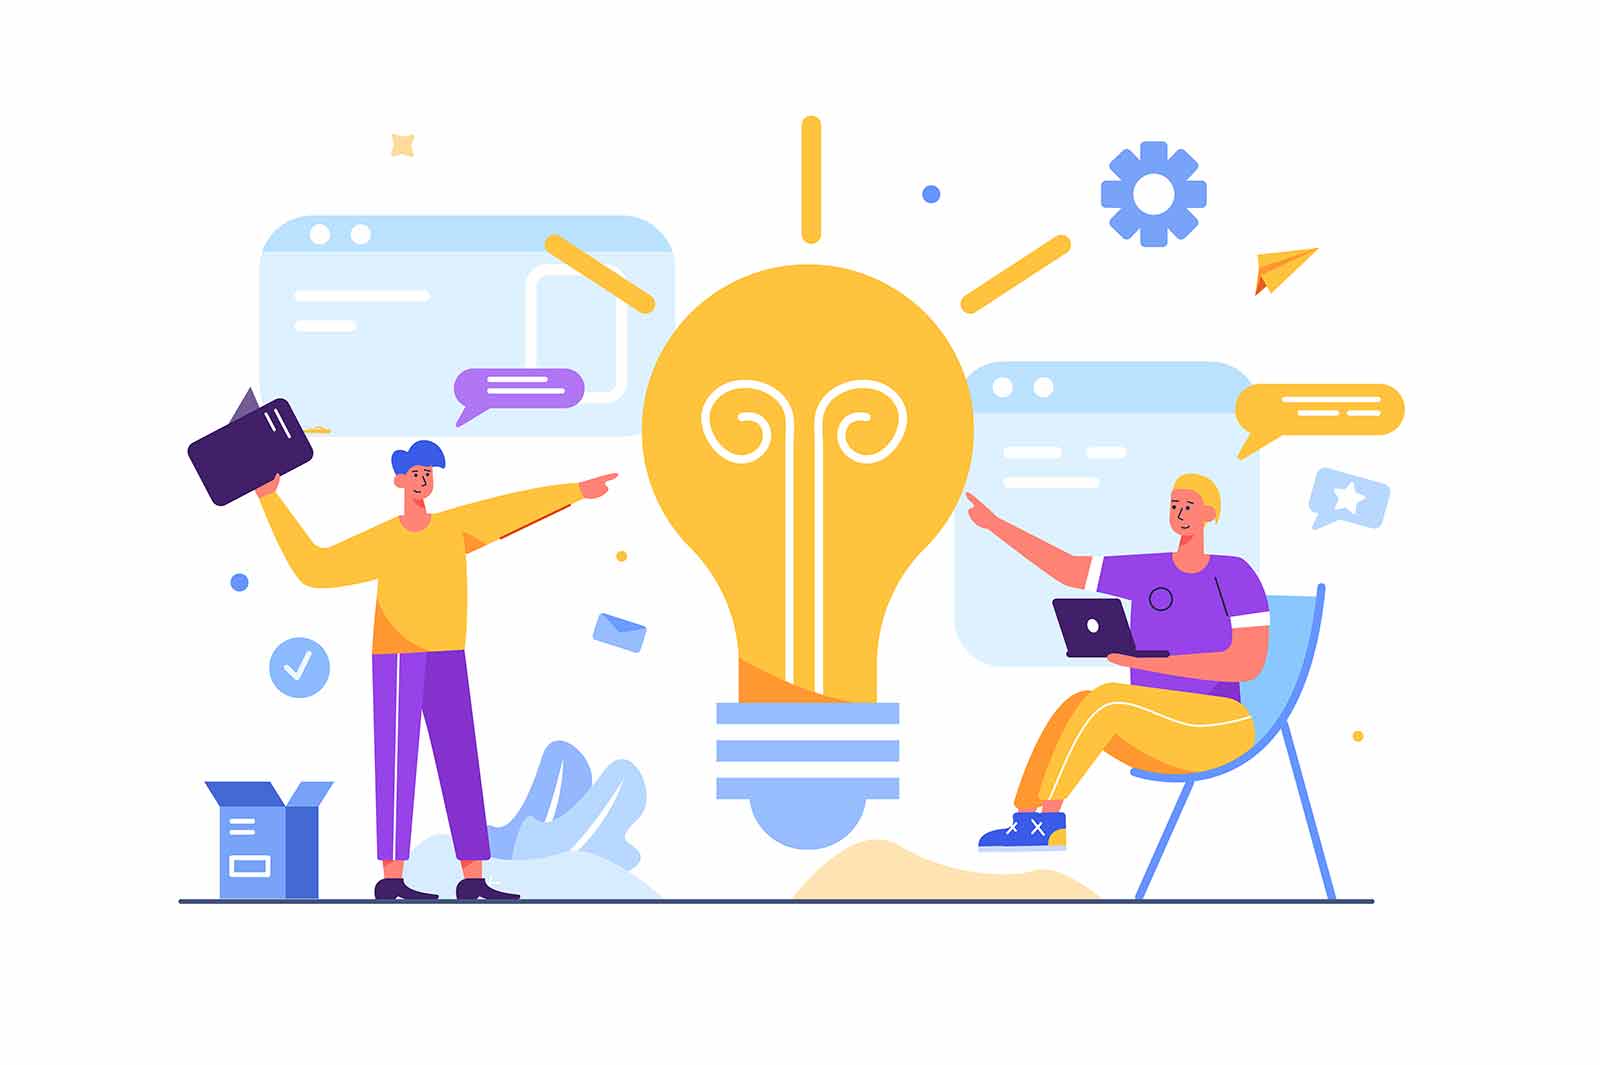 Two guys came up with an idea pointing at a big light bulb, communication, gadgets, inspiration, isolated on white background, flat vector illustration